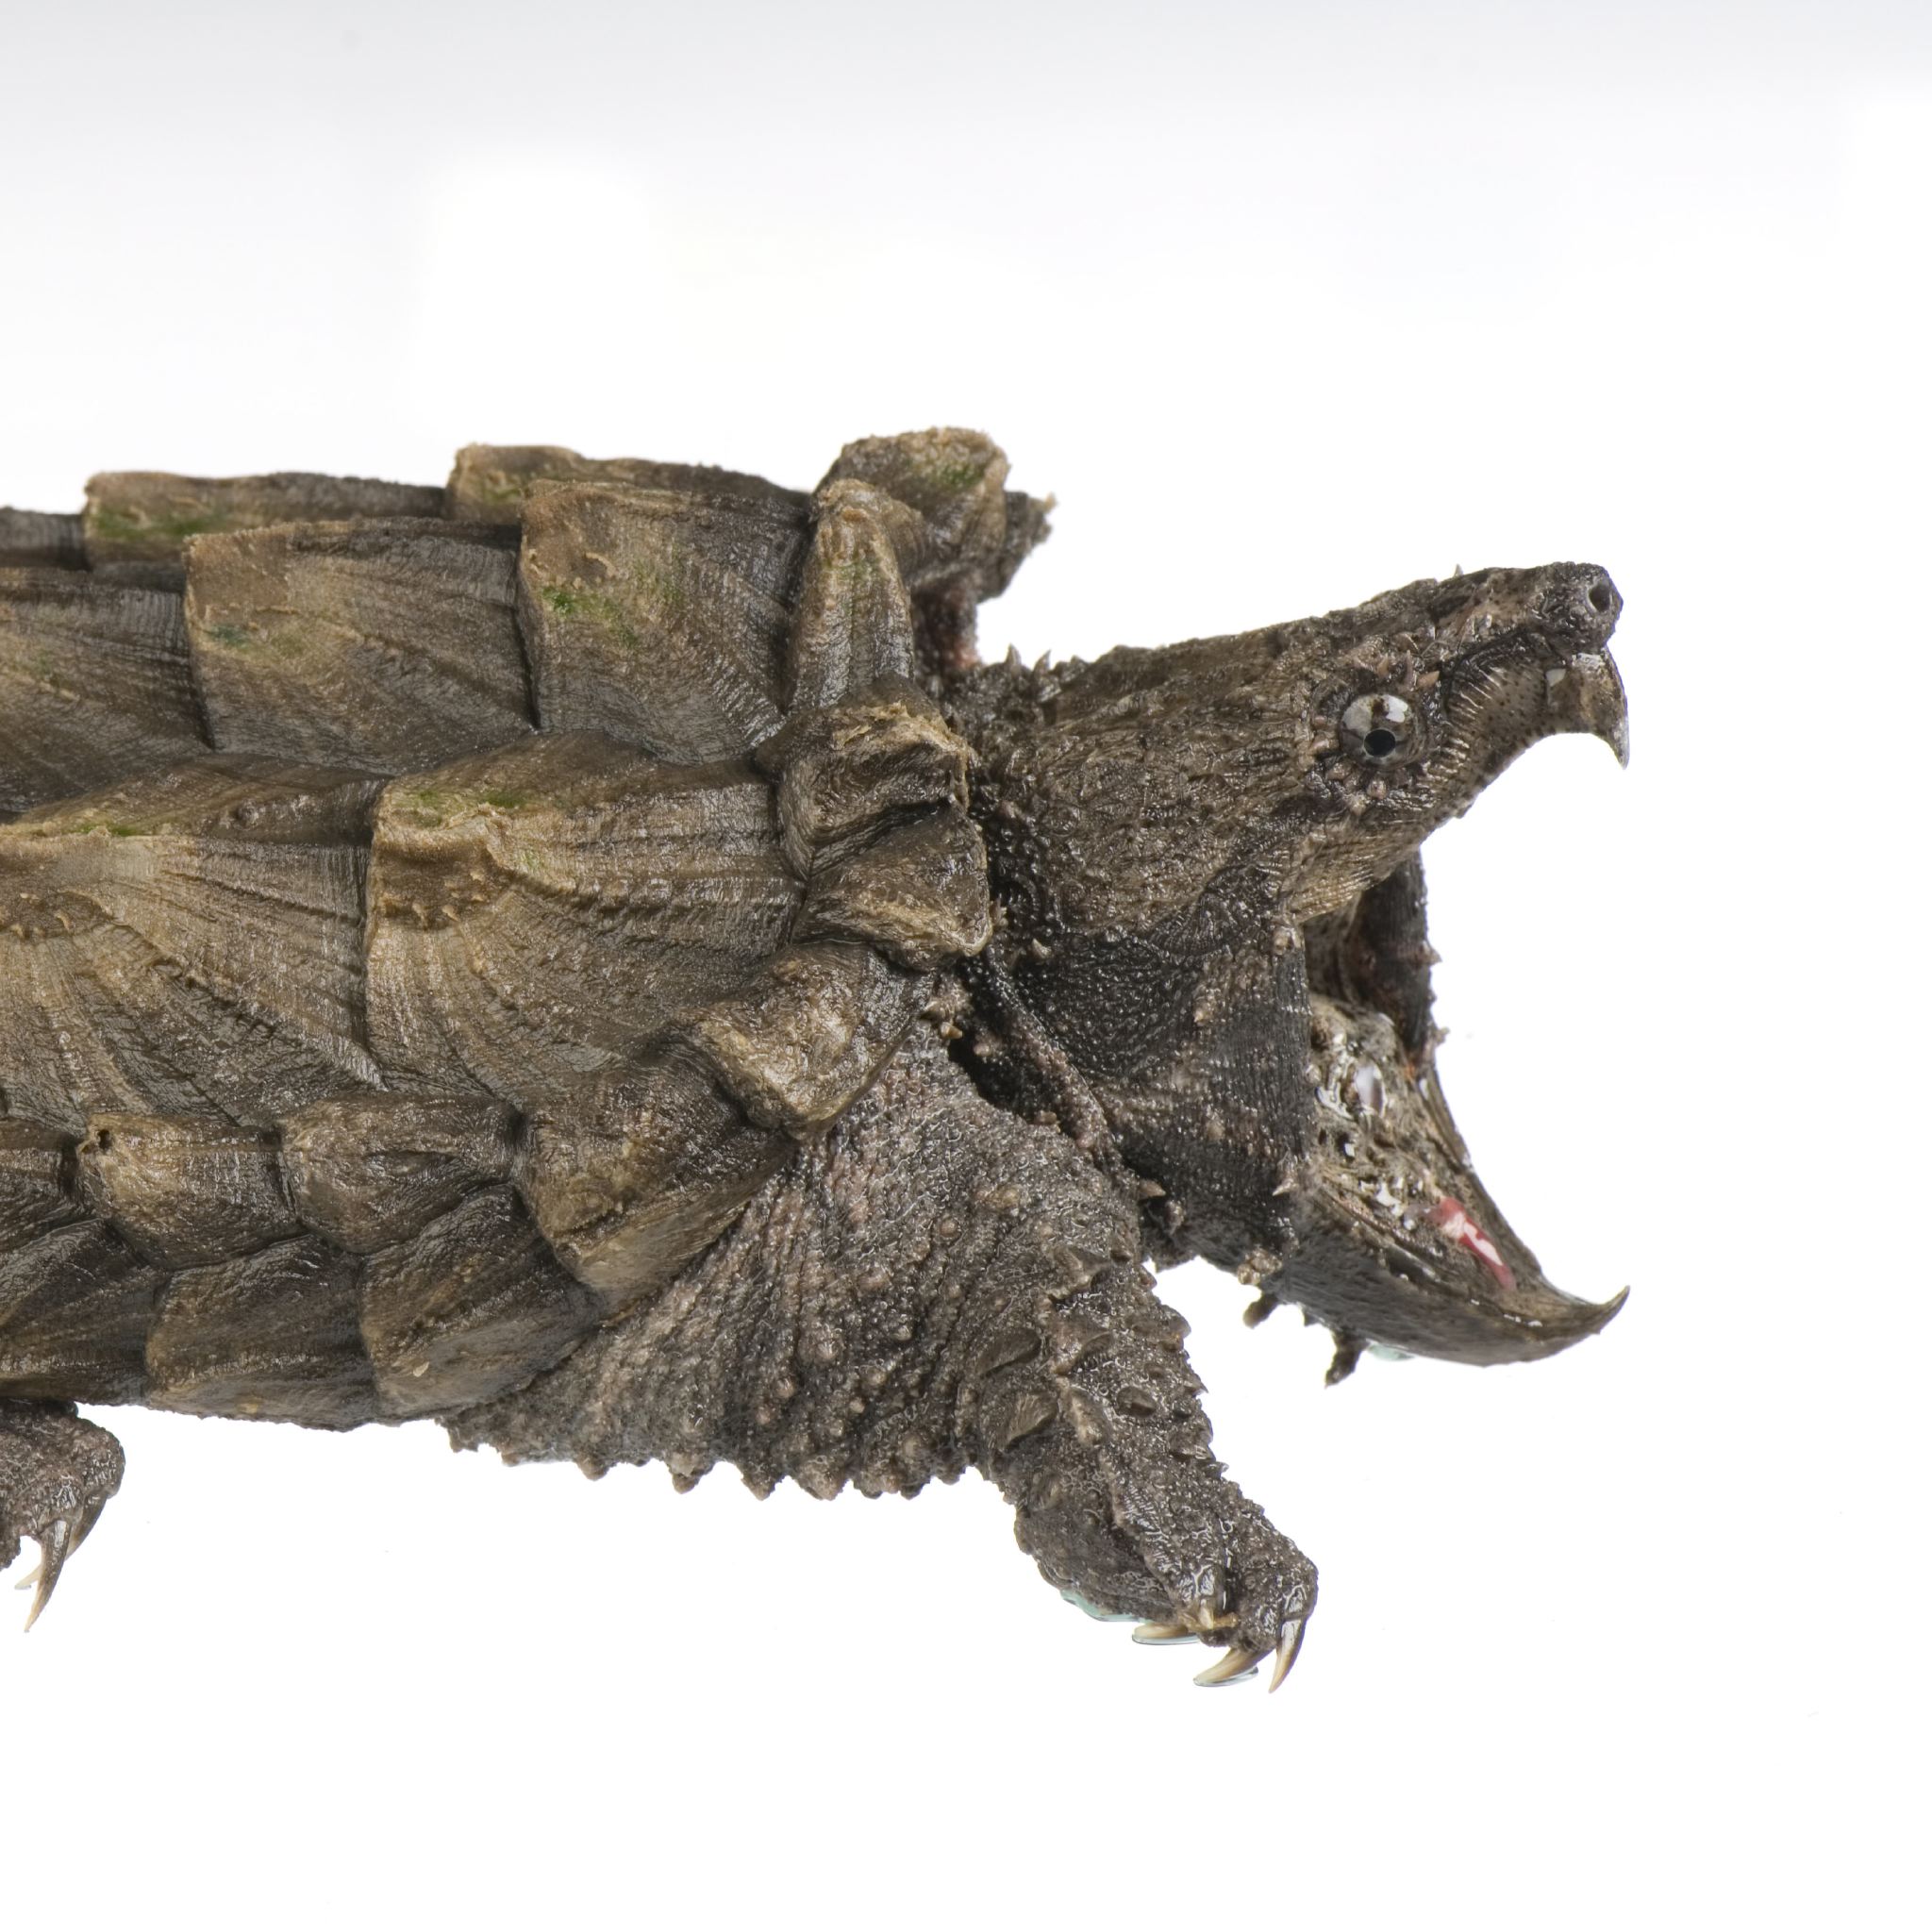 Alligator snapping turtle photo